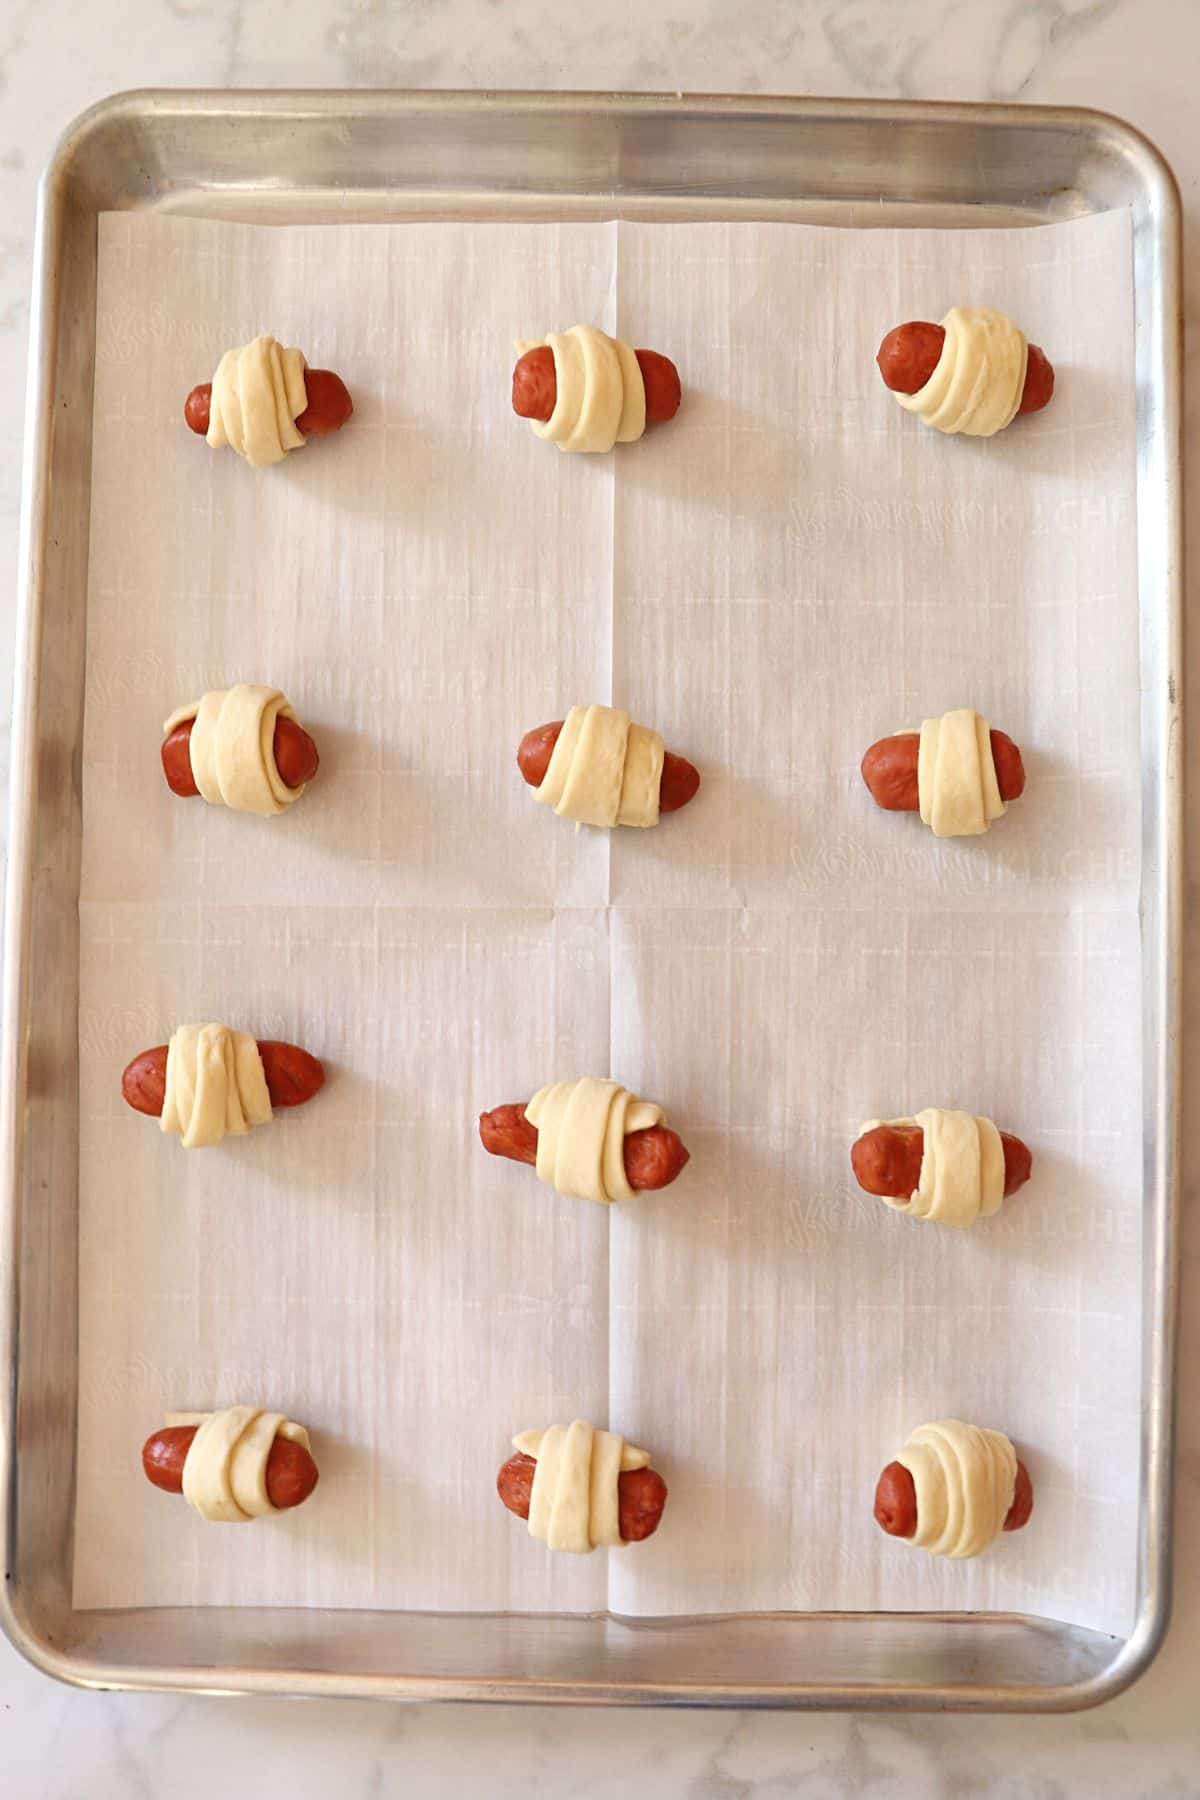 Little smokies pigs in a blanket placed on a baking sheet.